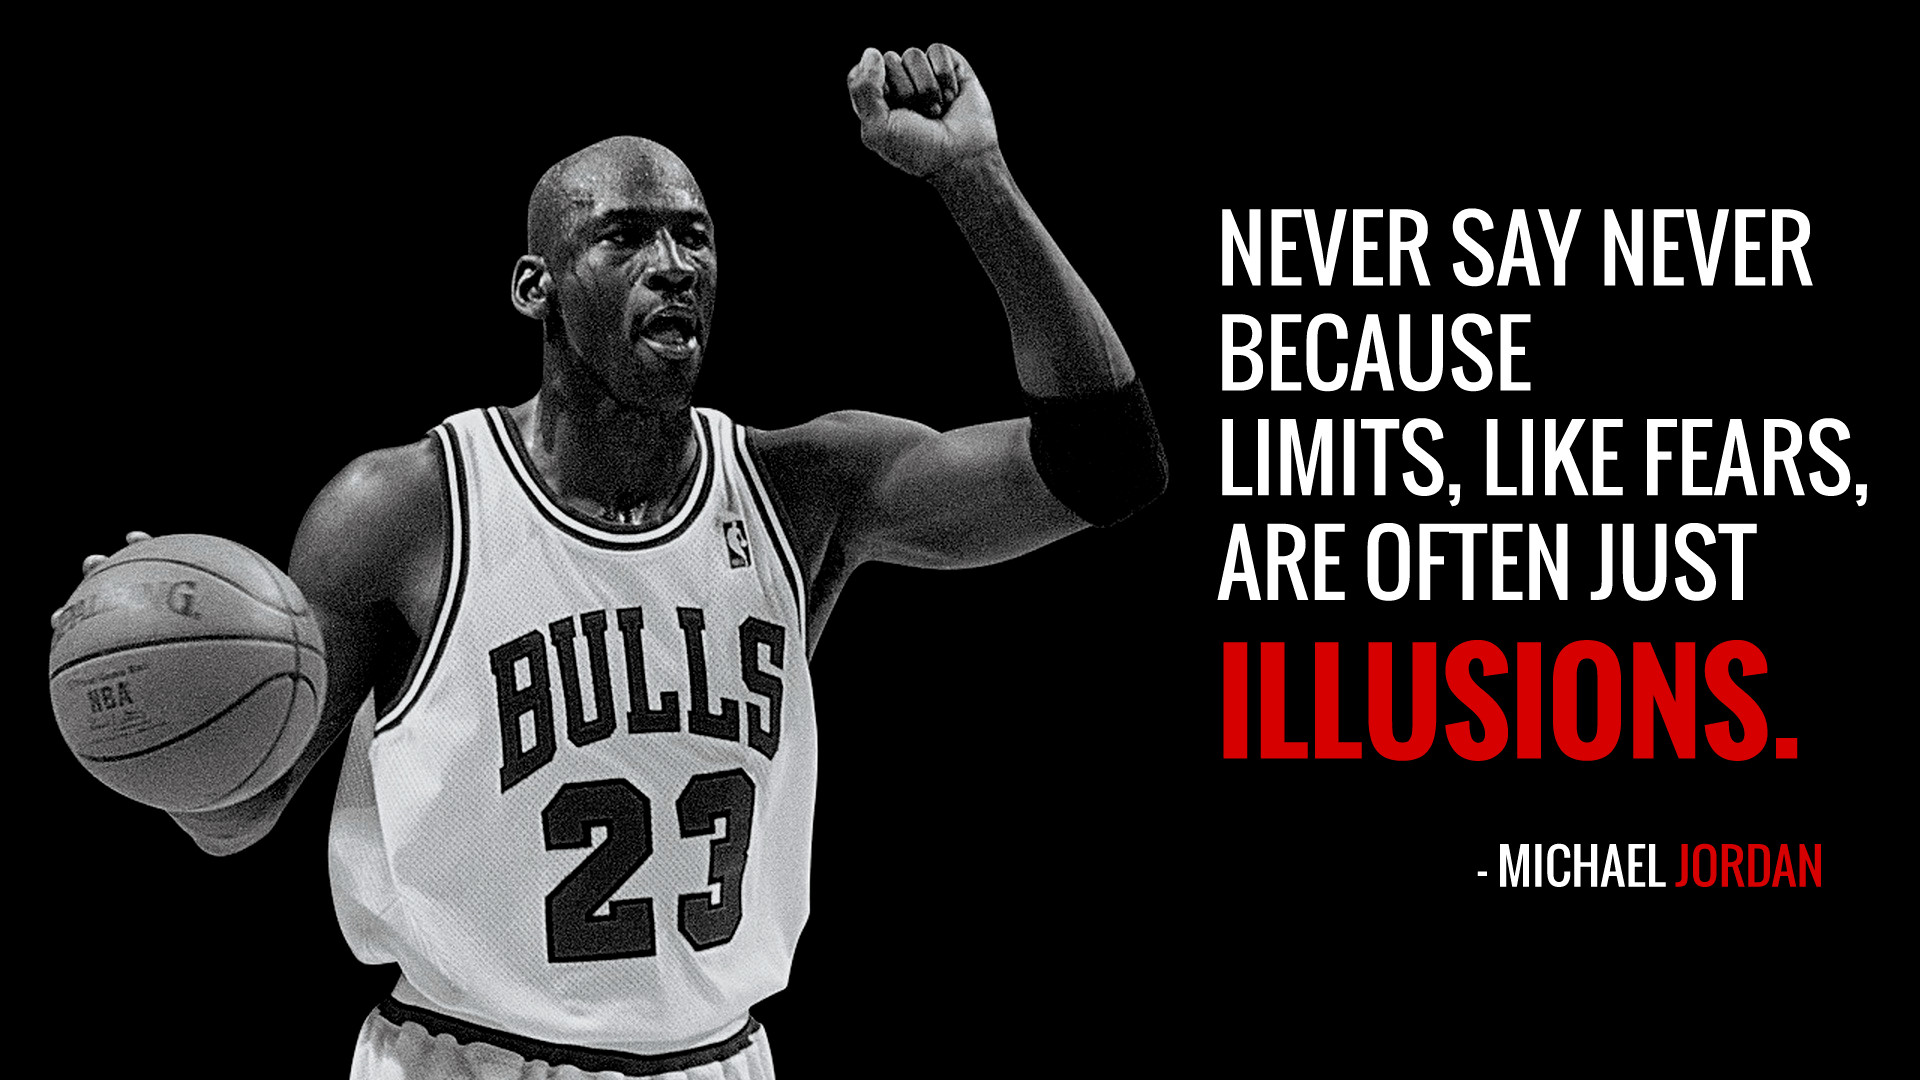 Inspirational Quotes Athletics
 25 All Time Best Inspirational Sports Quotes To Get You Going